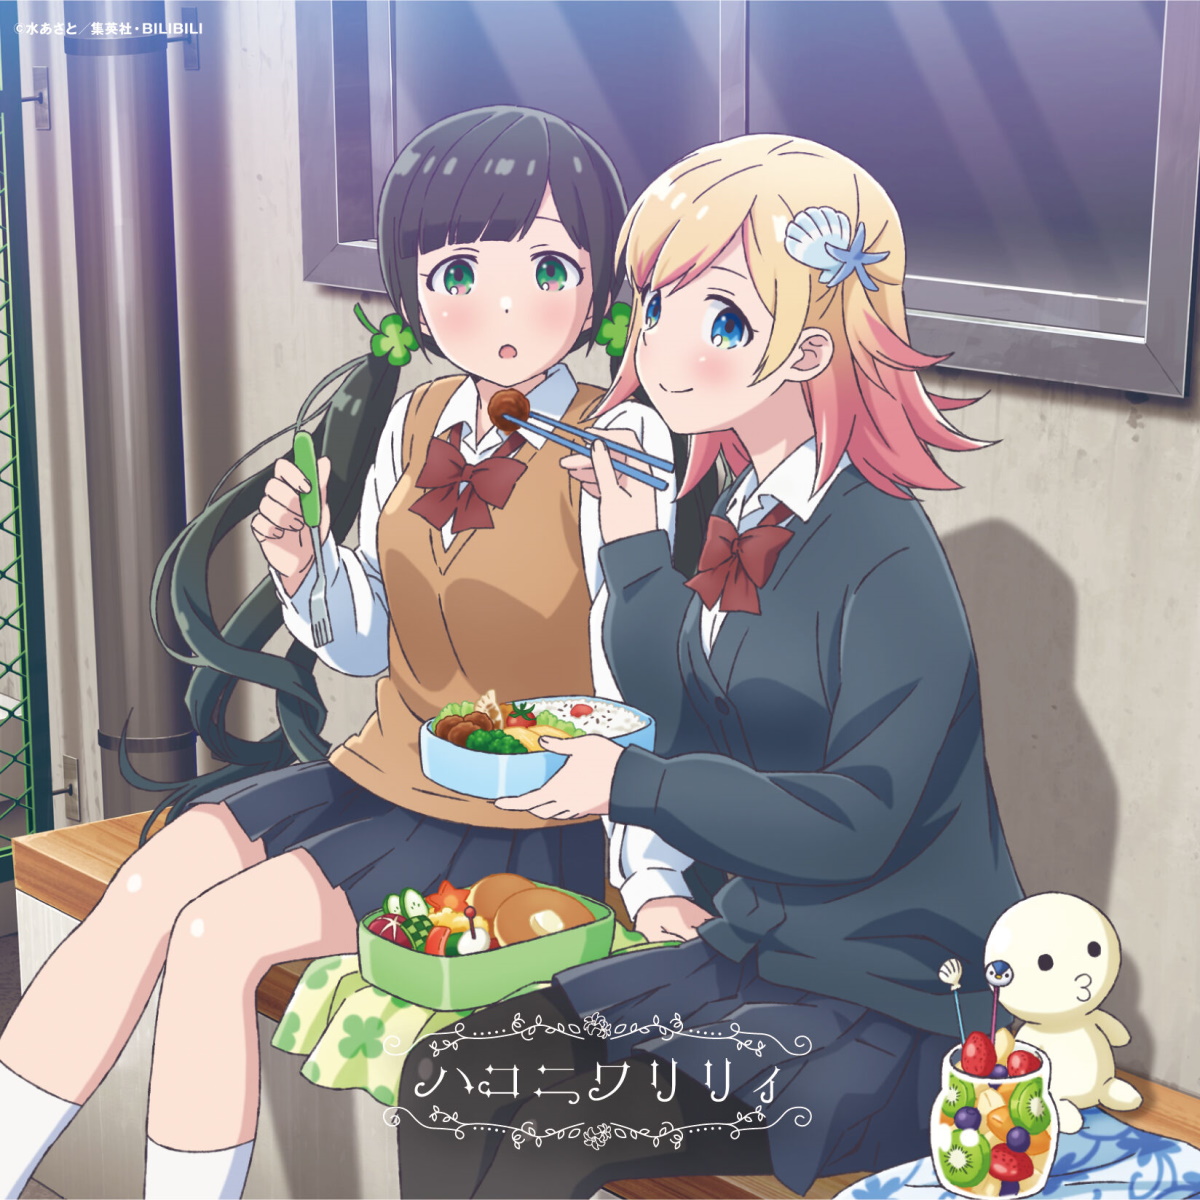 Cover art for『HaKoniwaLily - Kirakira Sweets Party』from the release『Kyorikan (HaKoniwaLily Anime Version)』